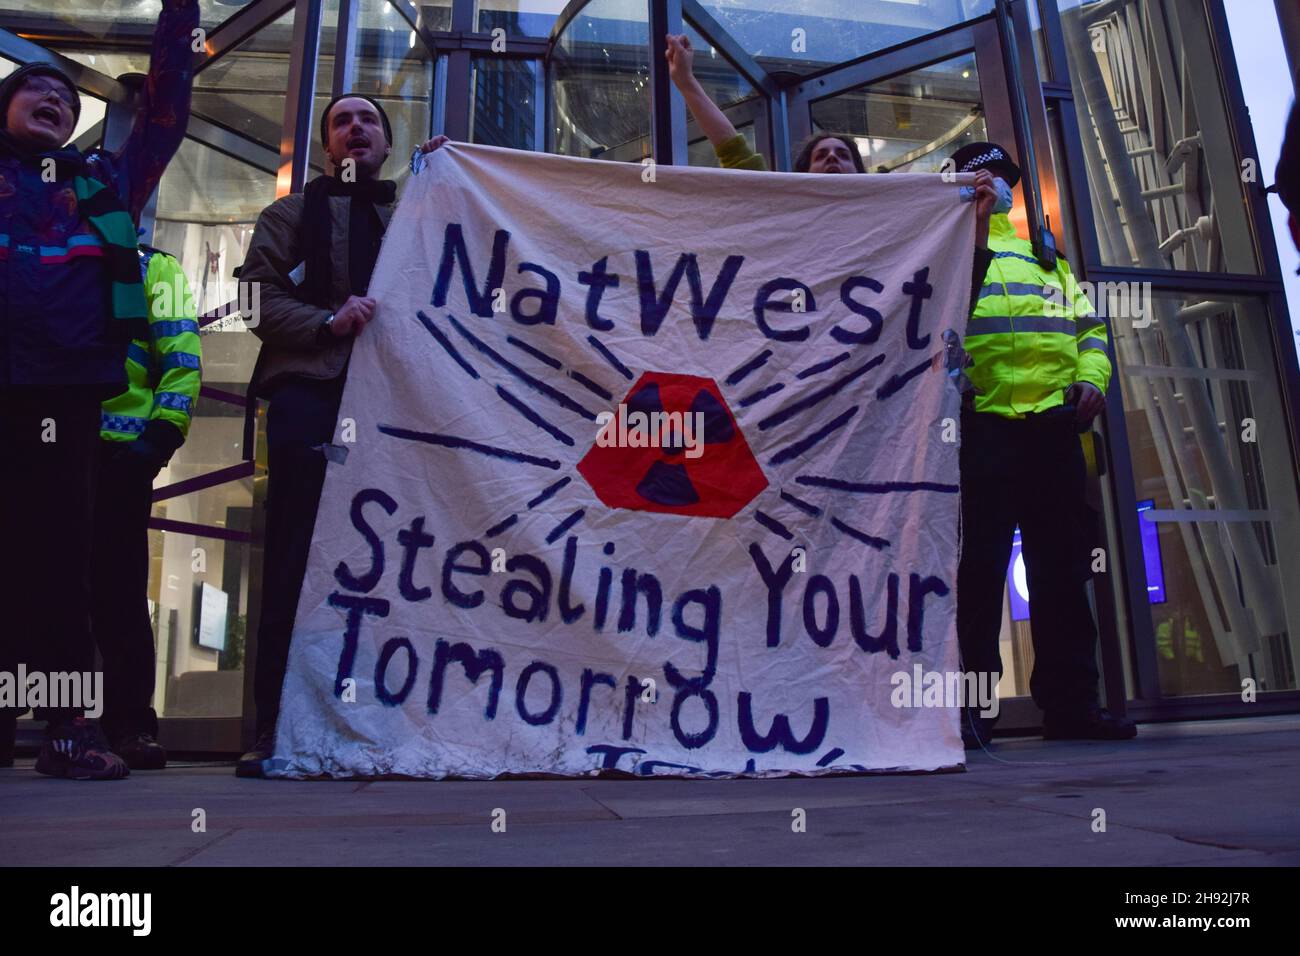 London, UK. 3rd December 2021. Protesters outside NatWest head office in Bishopsgate. University staff and members of the University and College Union (UCU) have taken strike action and marched through Central London in protest over gender, ethnic and disability pay inequality, work conditions, and falling pay. Credit: Vuk Valcic / Alamy Live News Stock Photo